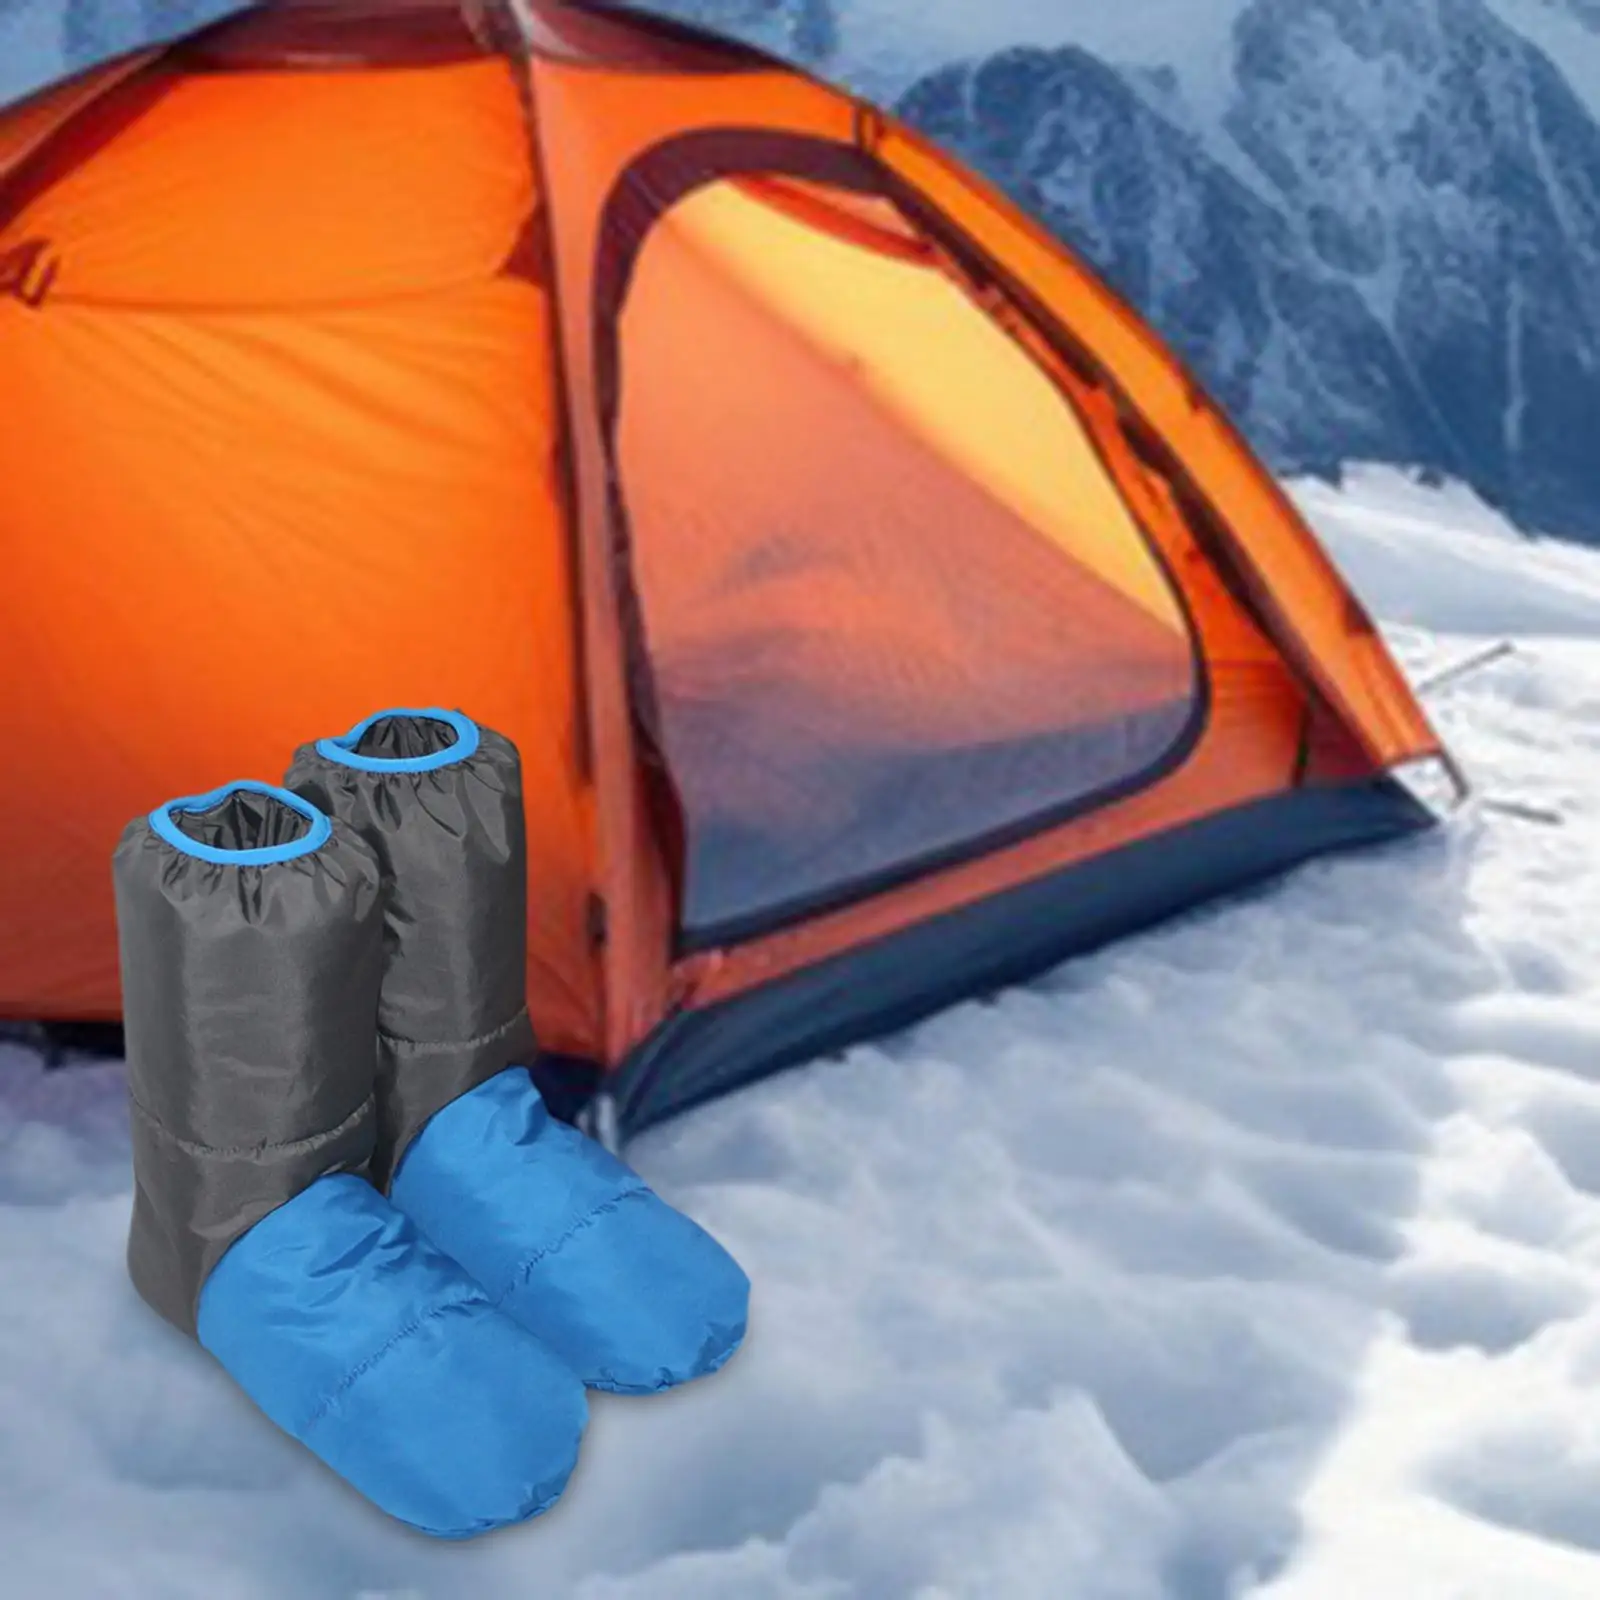 Down Booties Down Shoes Foot Socks Windproof Warm Boots Anti Skid Slippers for Camping Indoor Hiking Men Women Bed